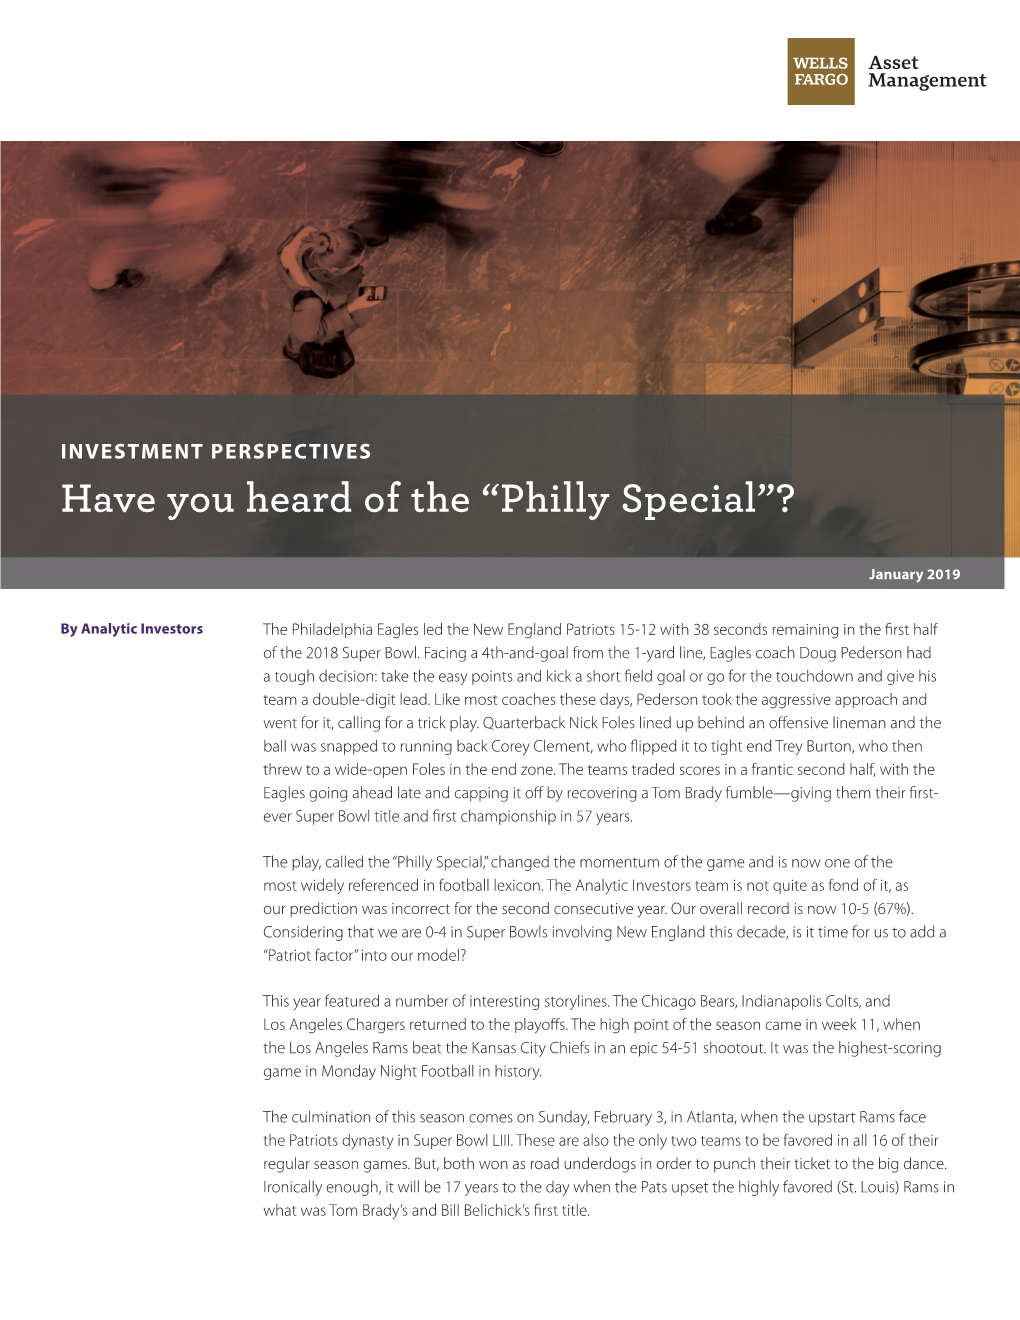 Have You Heard of the “Philly Special”?